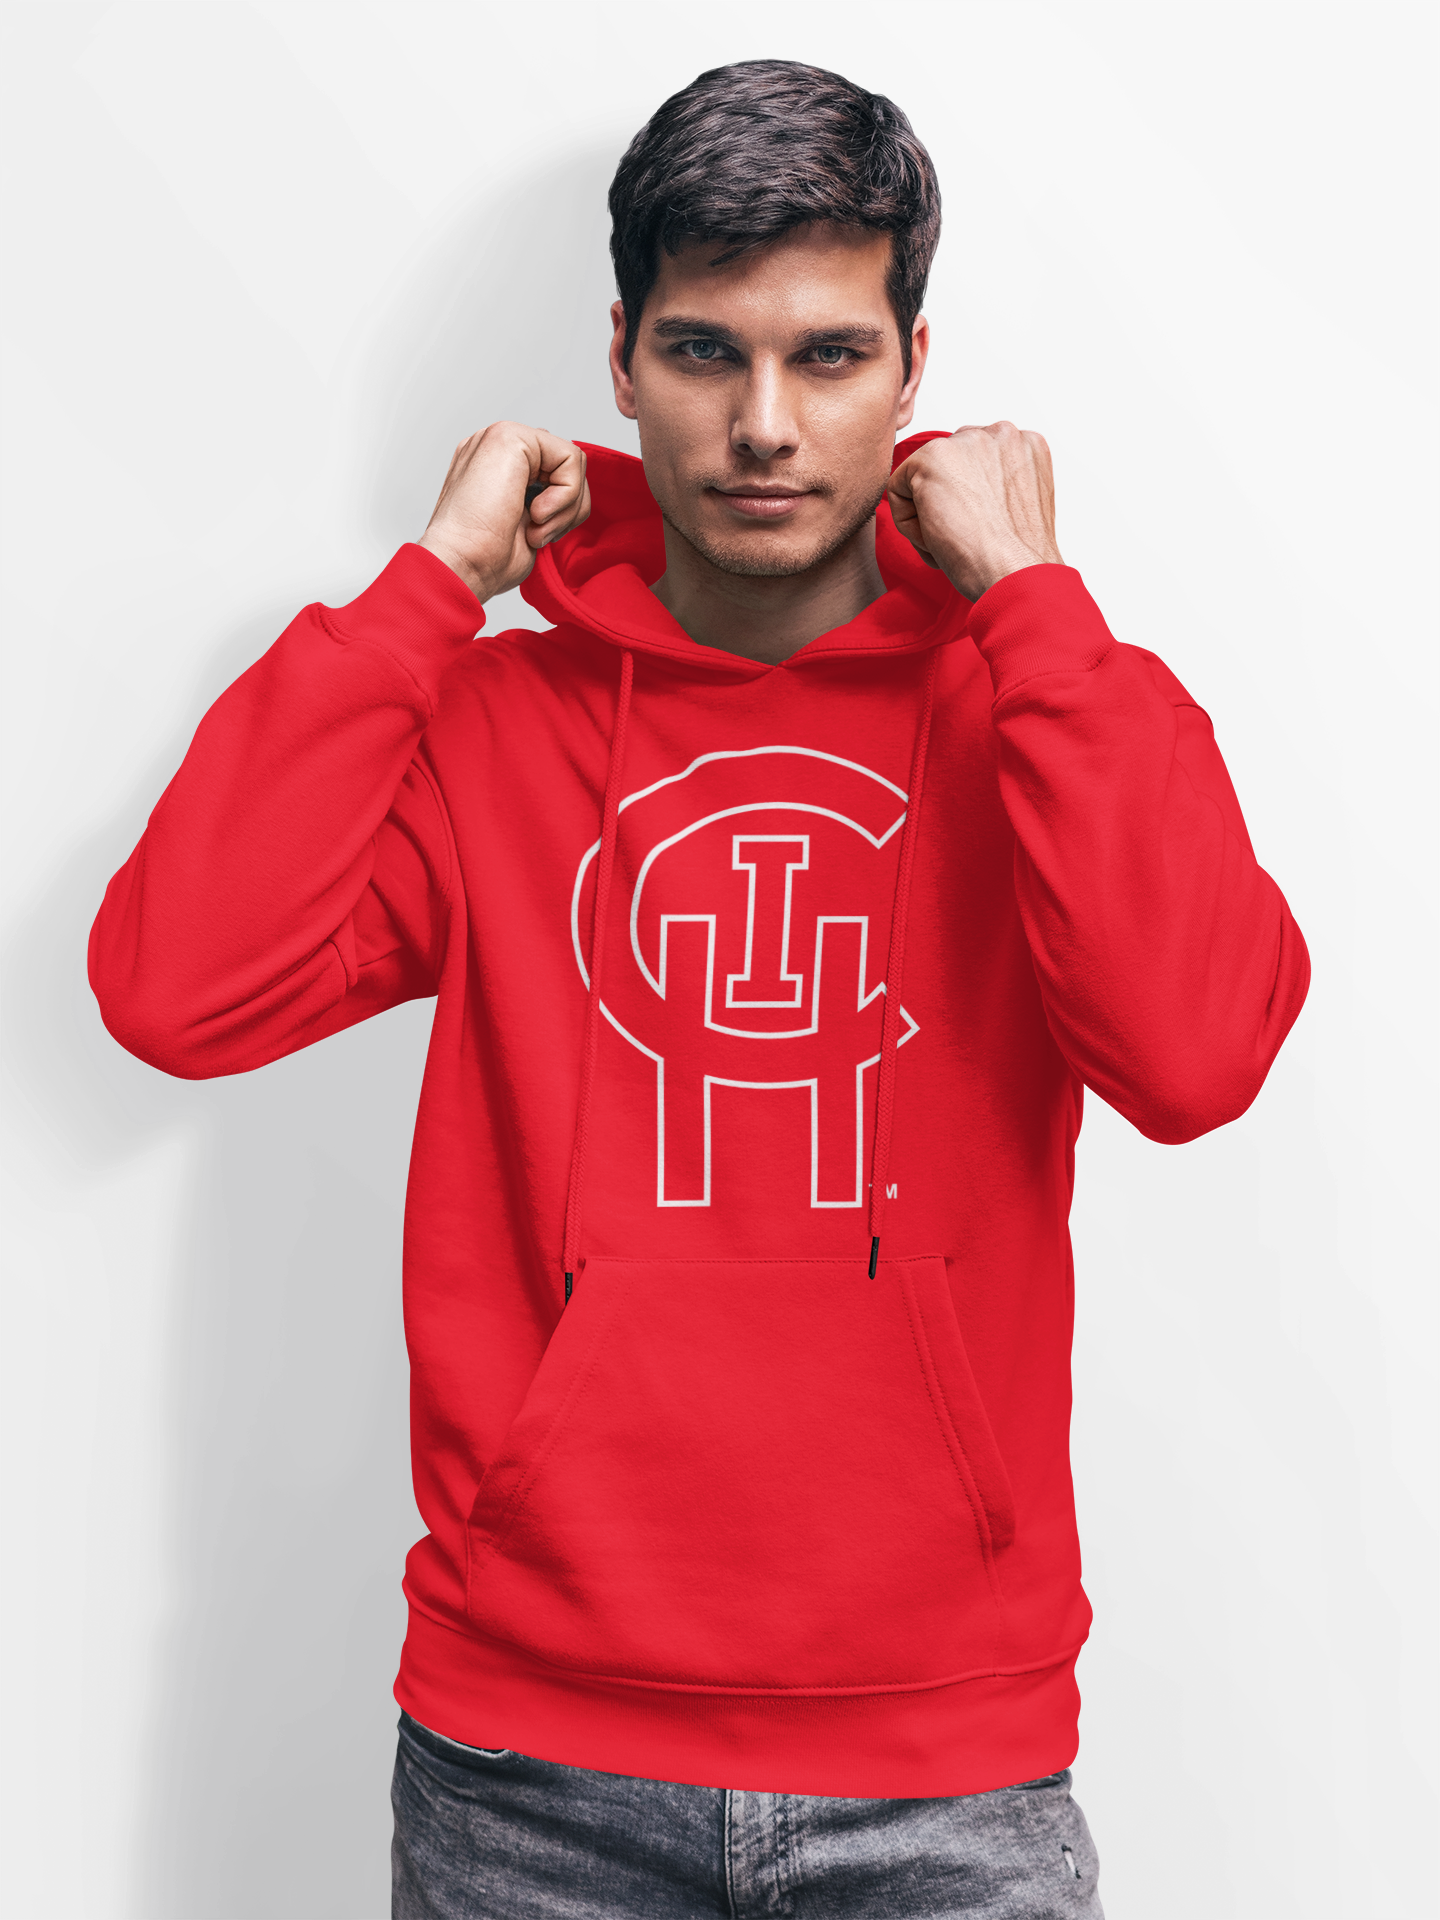 CHI PUNCHOUT HOODIE